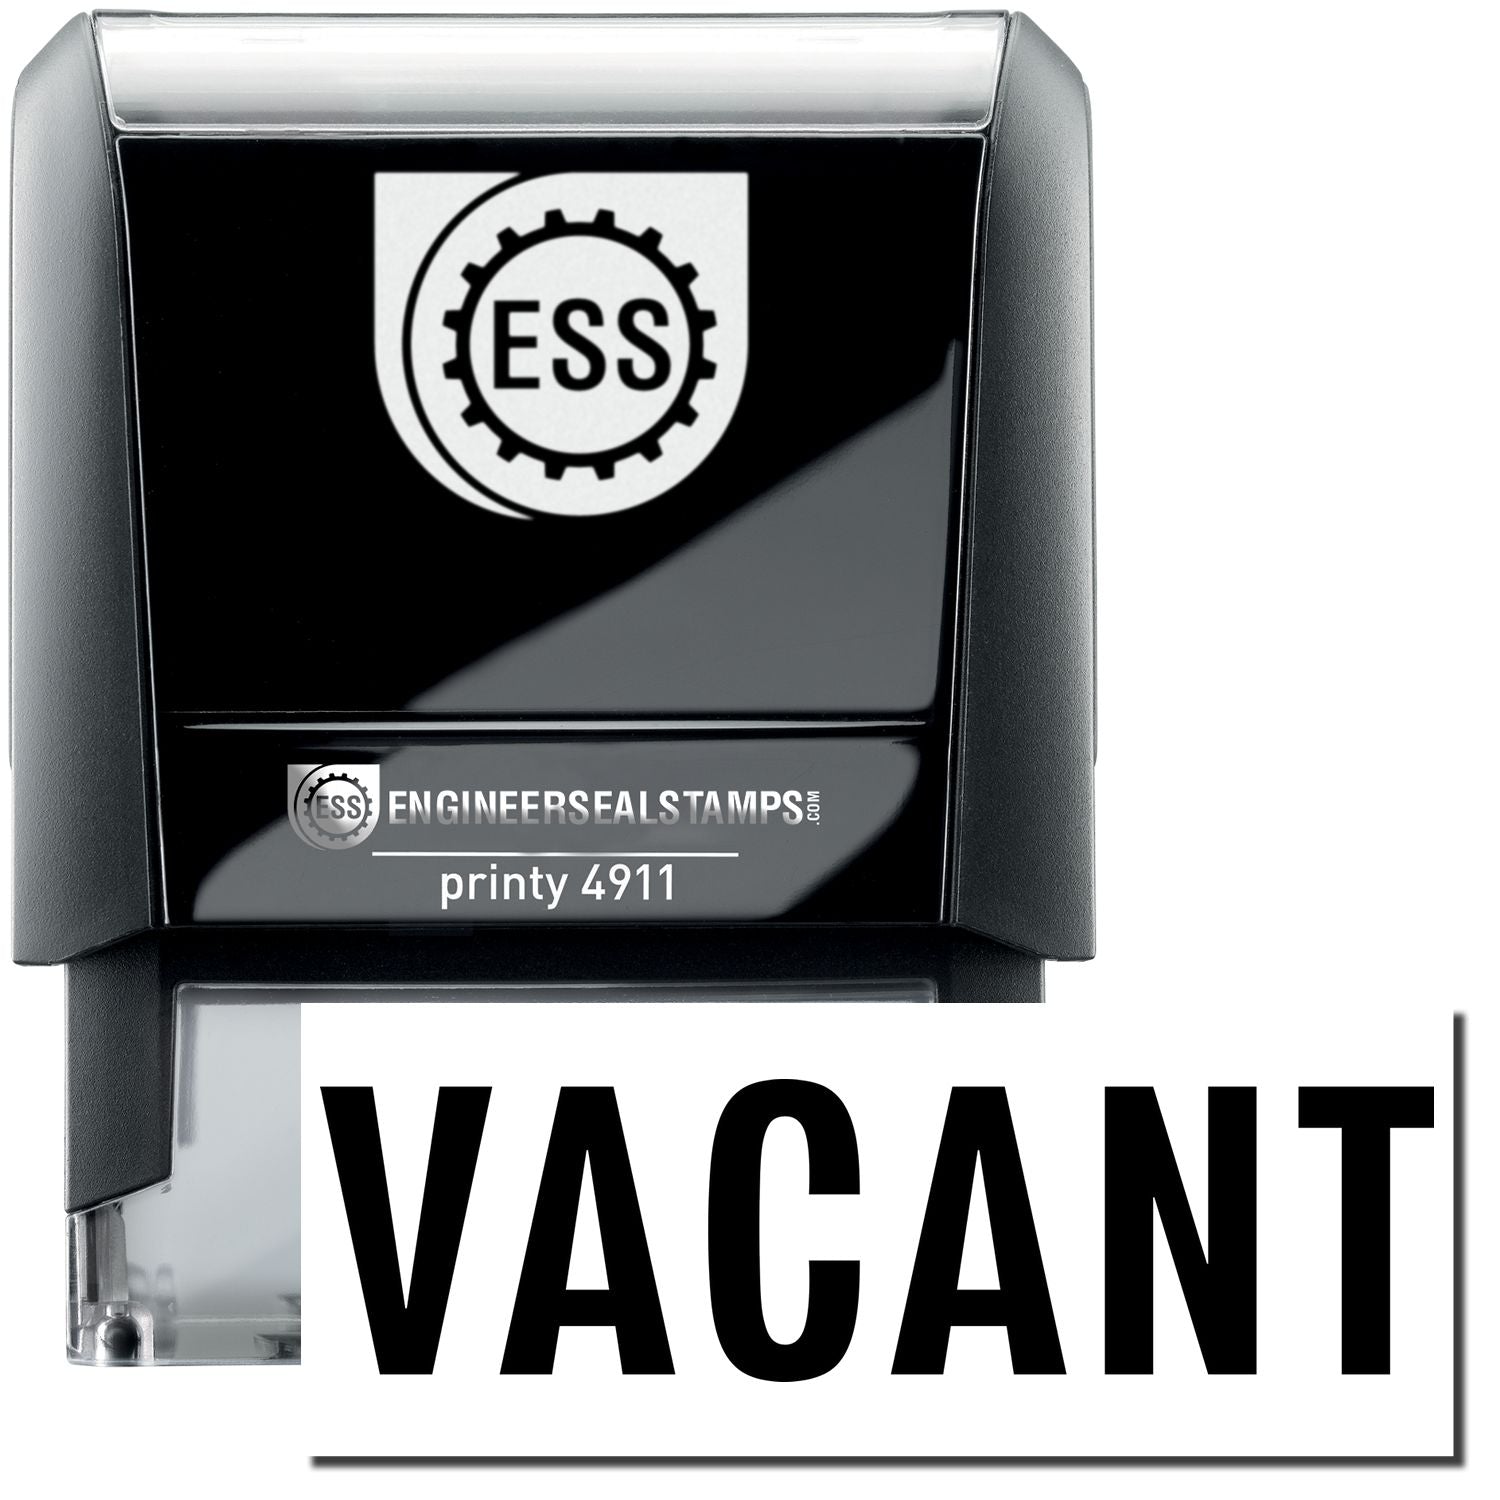 A self-inking stamp with a stamped image showing how the text "VACANT" is displayed after stamping.